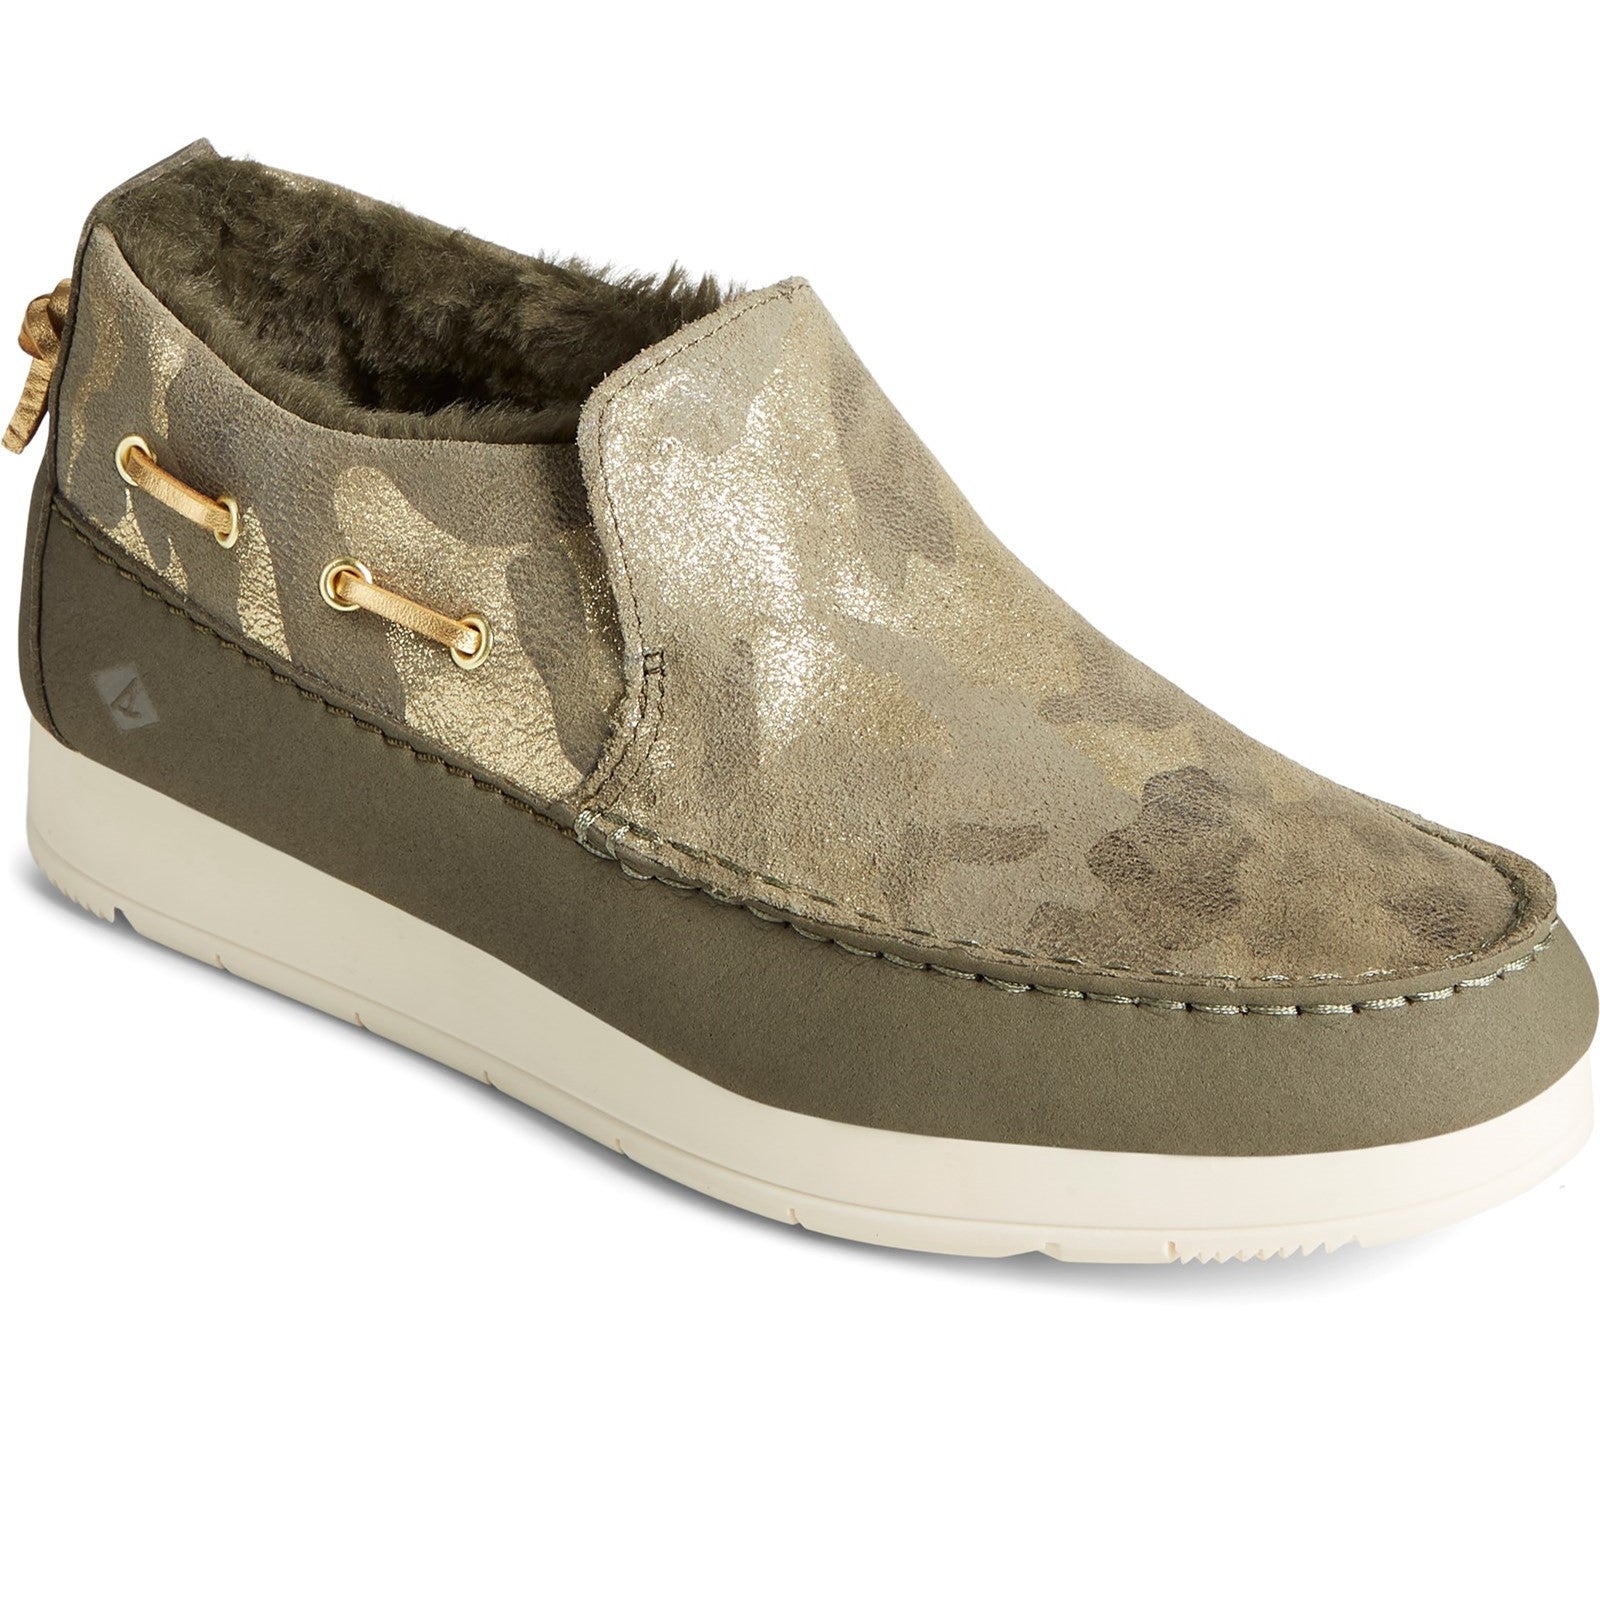 Sperry Womens Moc-Sider Metallic Shoes - Olive